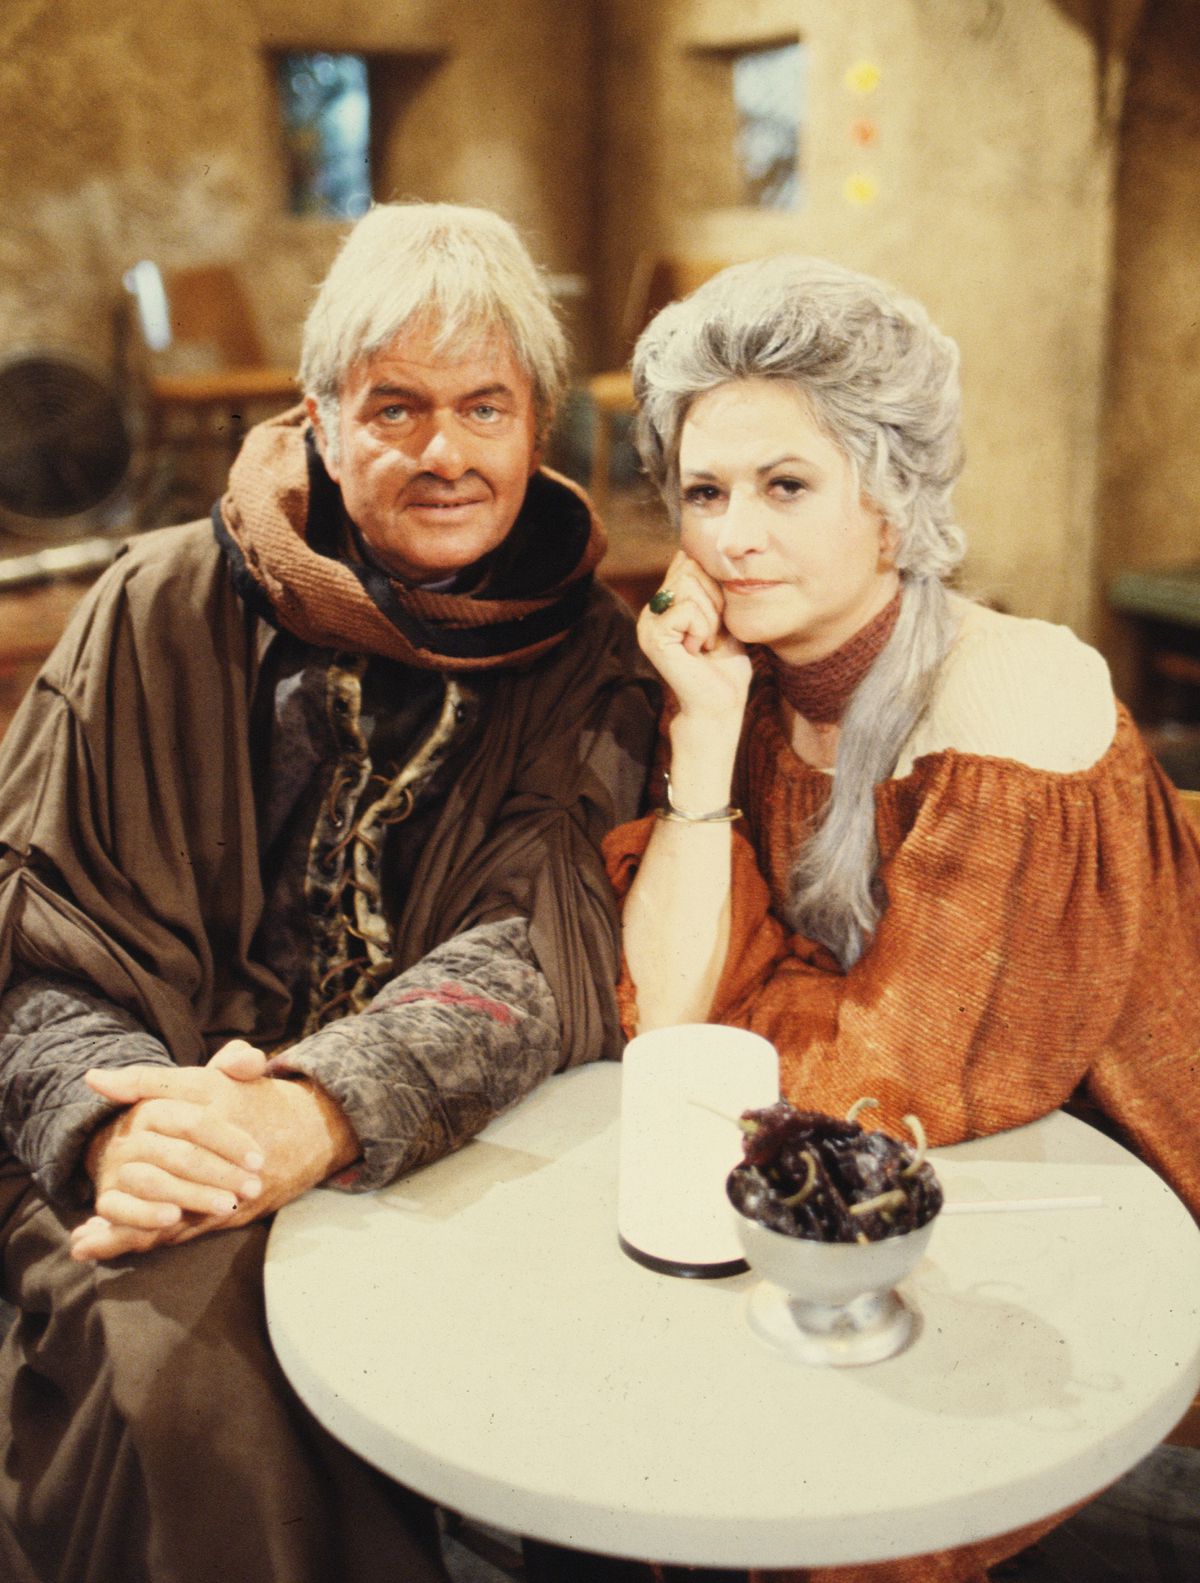 Art Carney and Bea Arthur sit together in their Star Wars costumes, looking at the camera, in a posed publicity photo for 1978’s The Star Wars Holiday Special